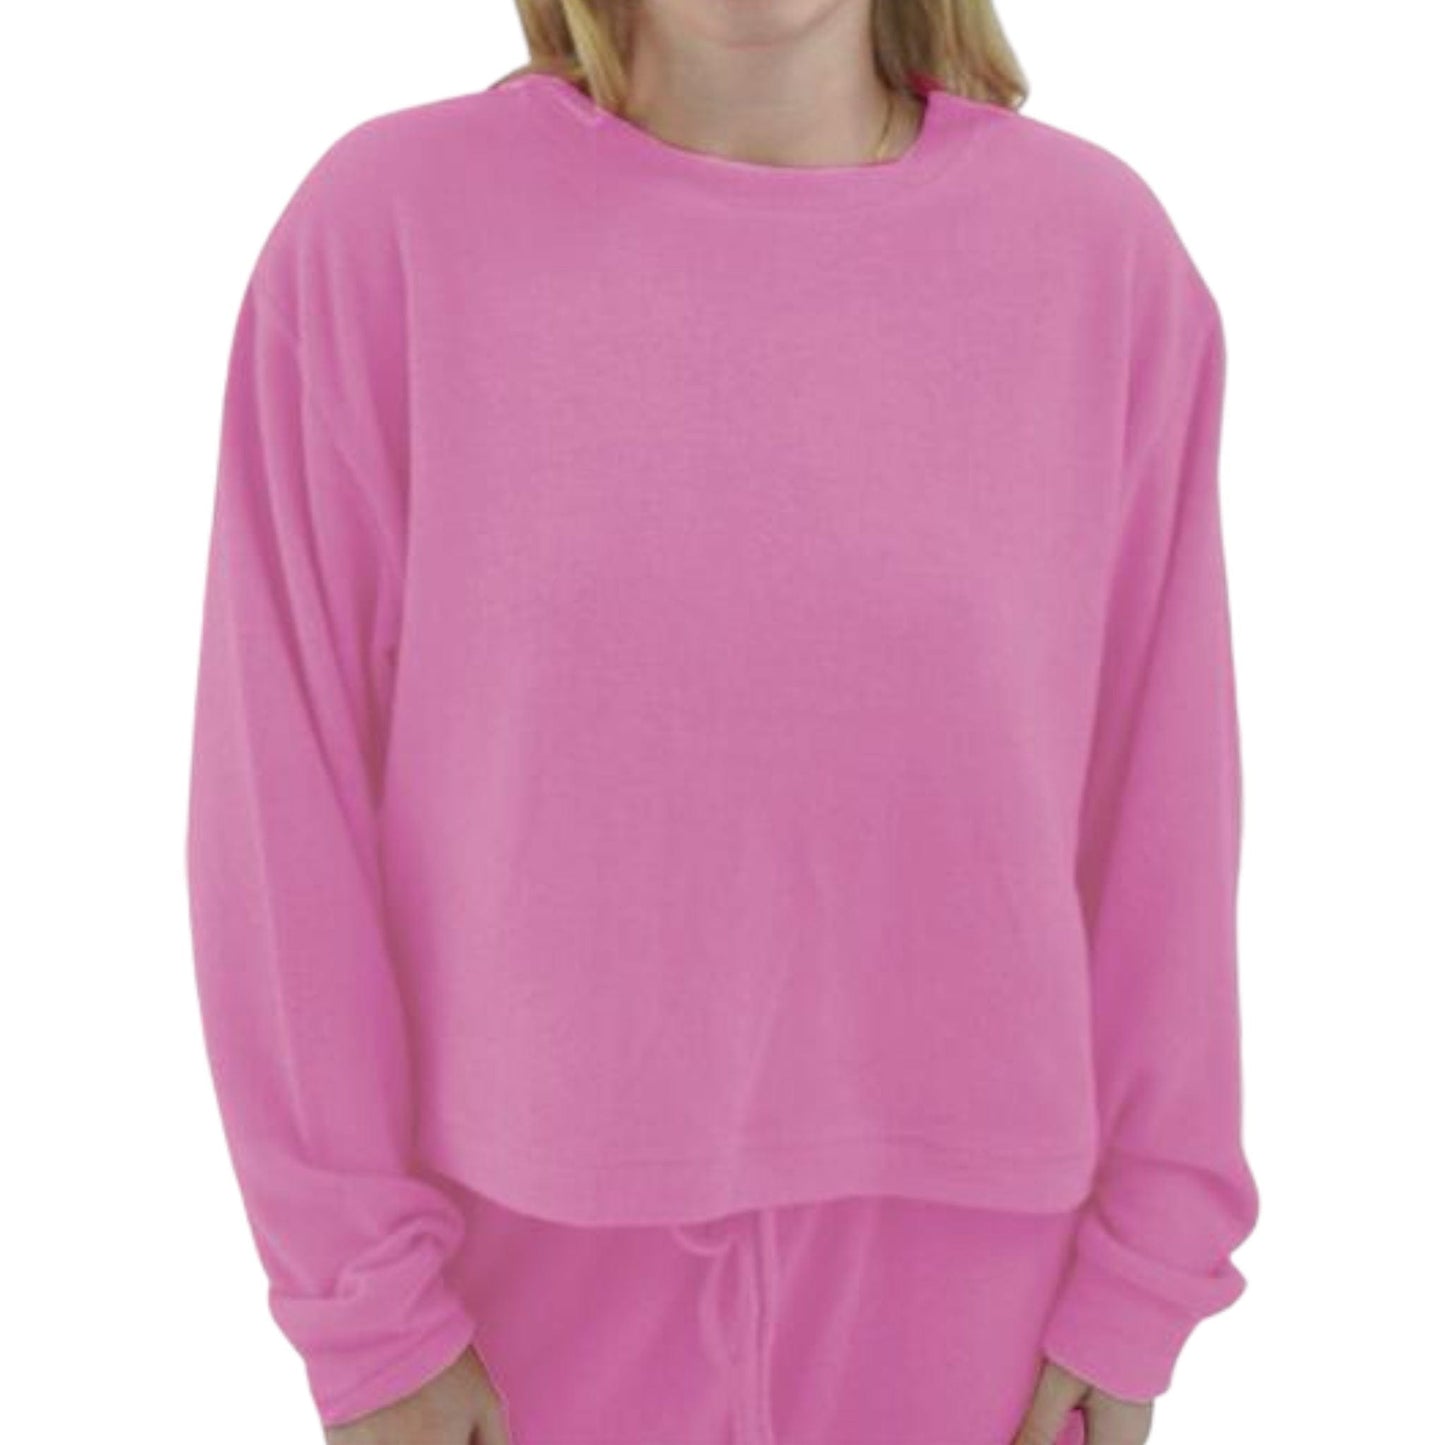 Cuddle Soft Crew Neck Top - multiple colors available